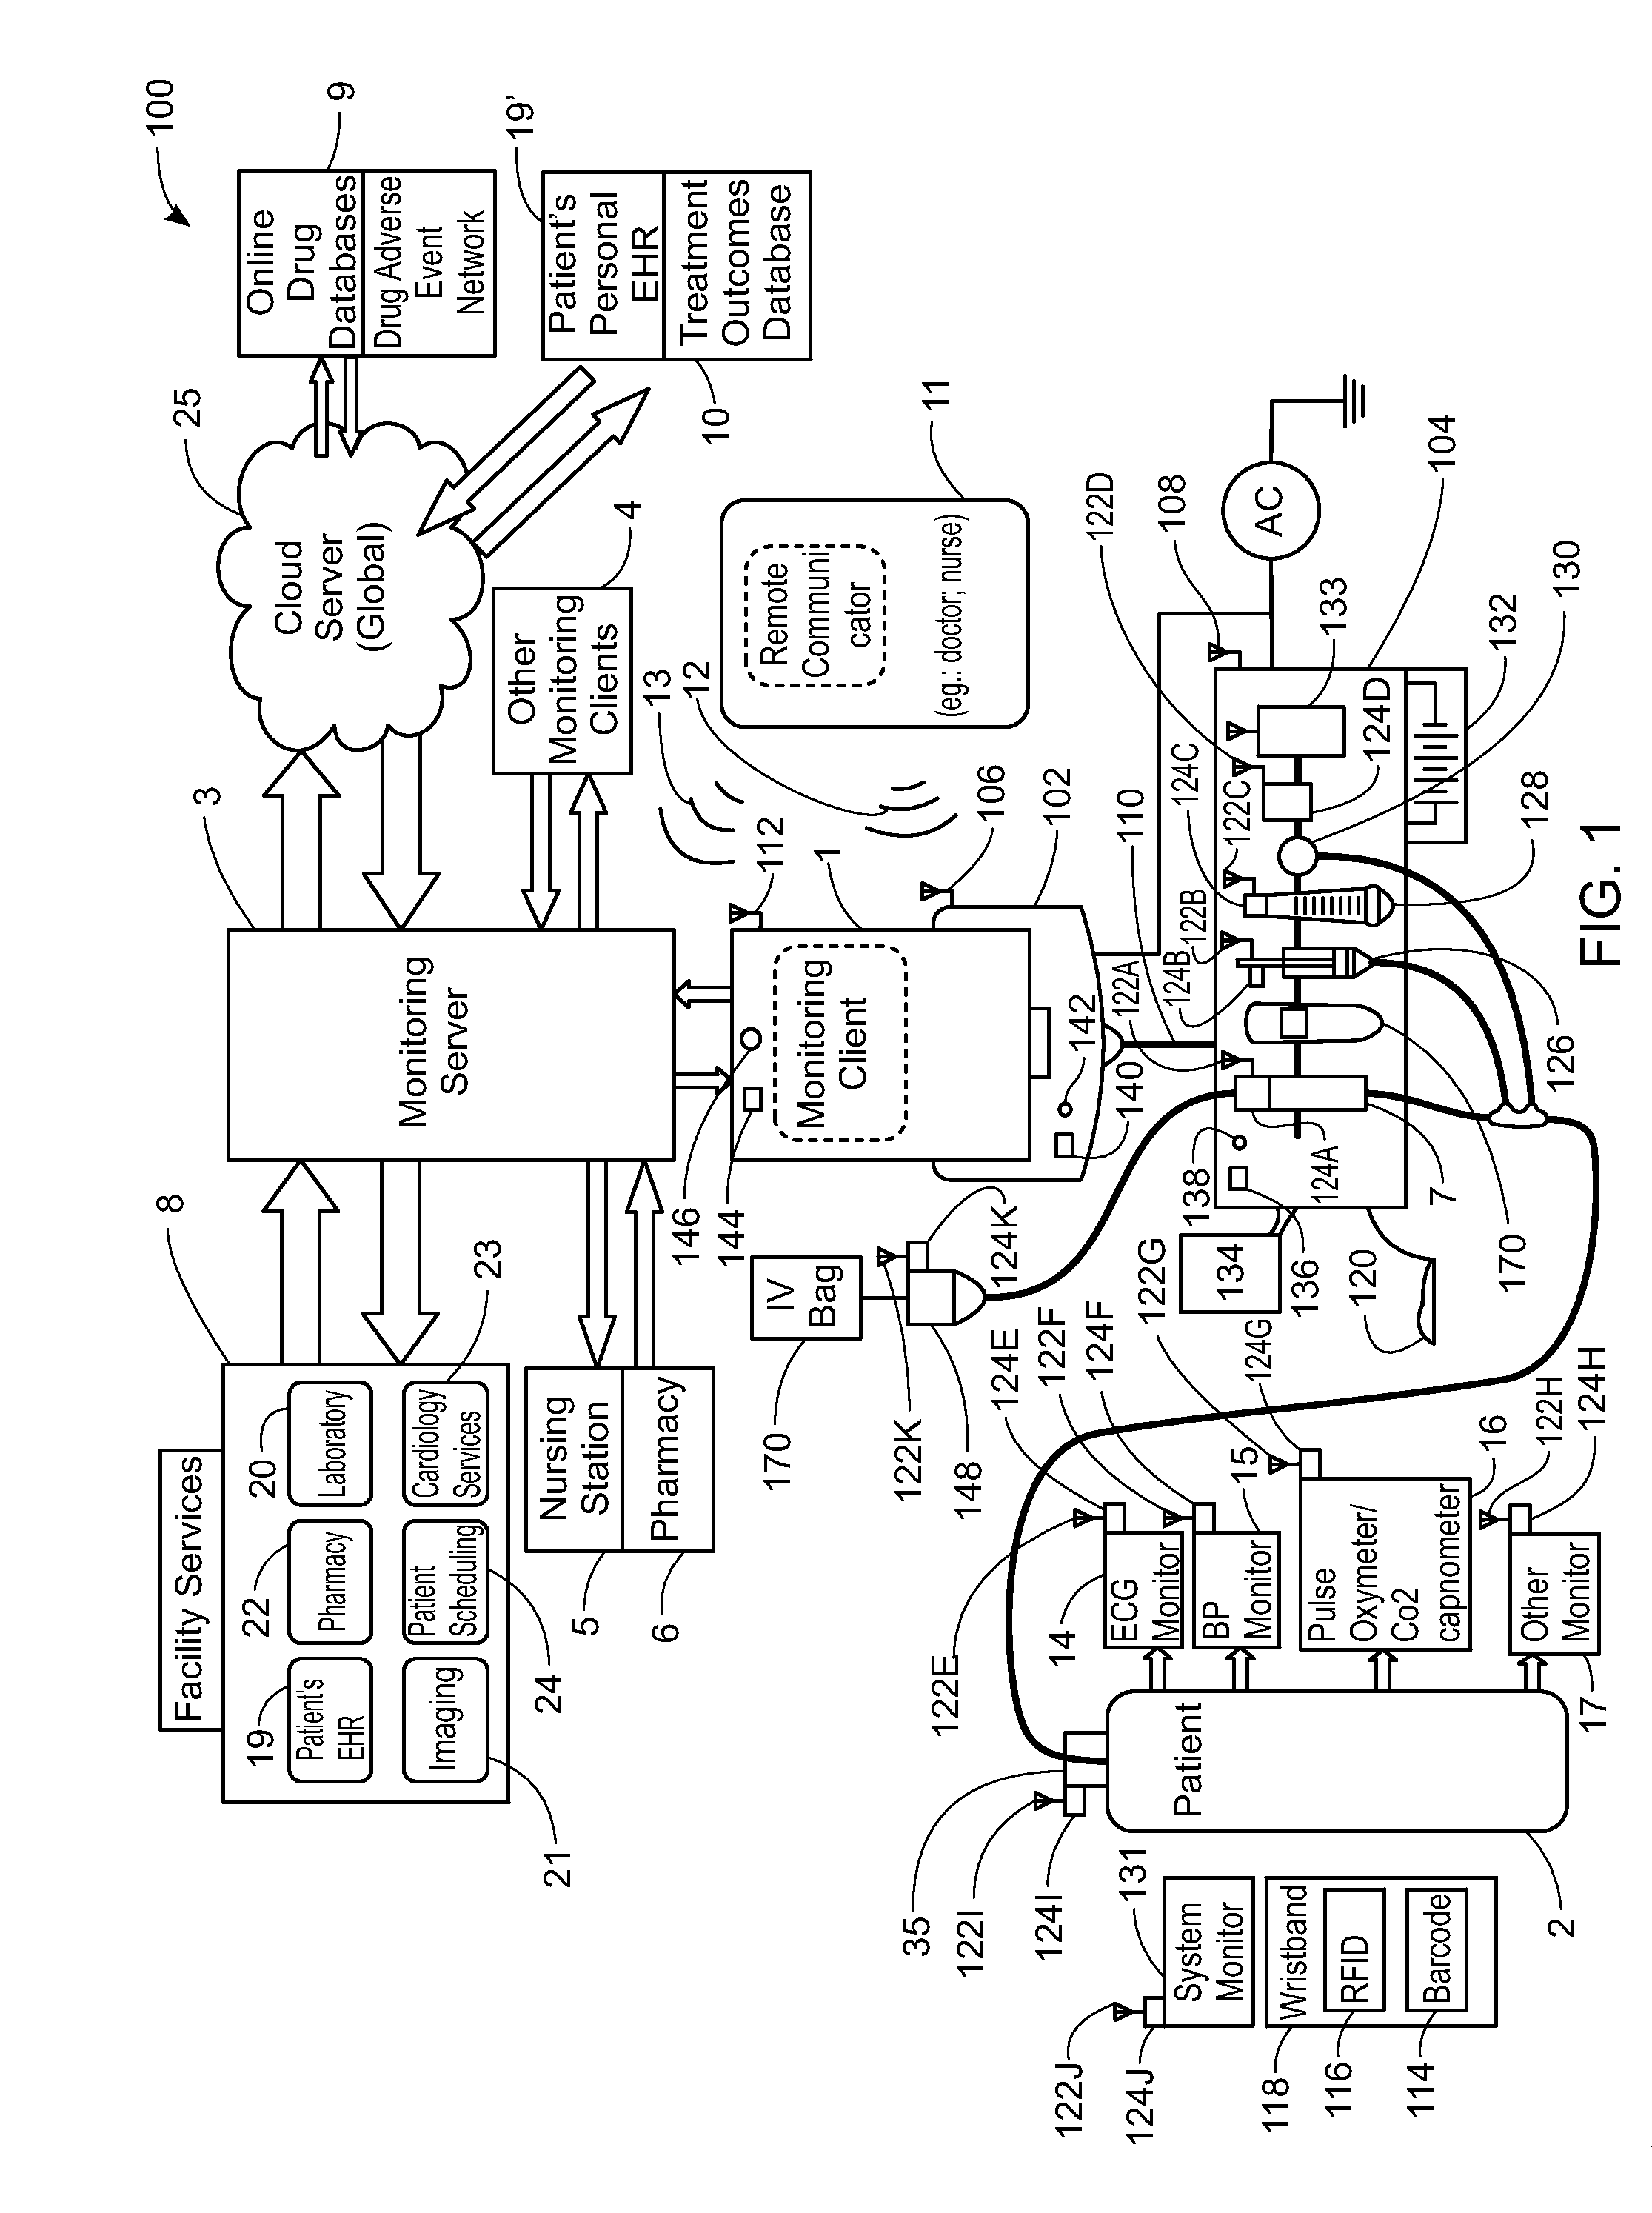 System, Method, and Apparatus for Electroinic Patient Care